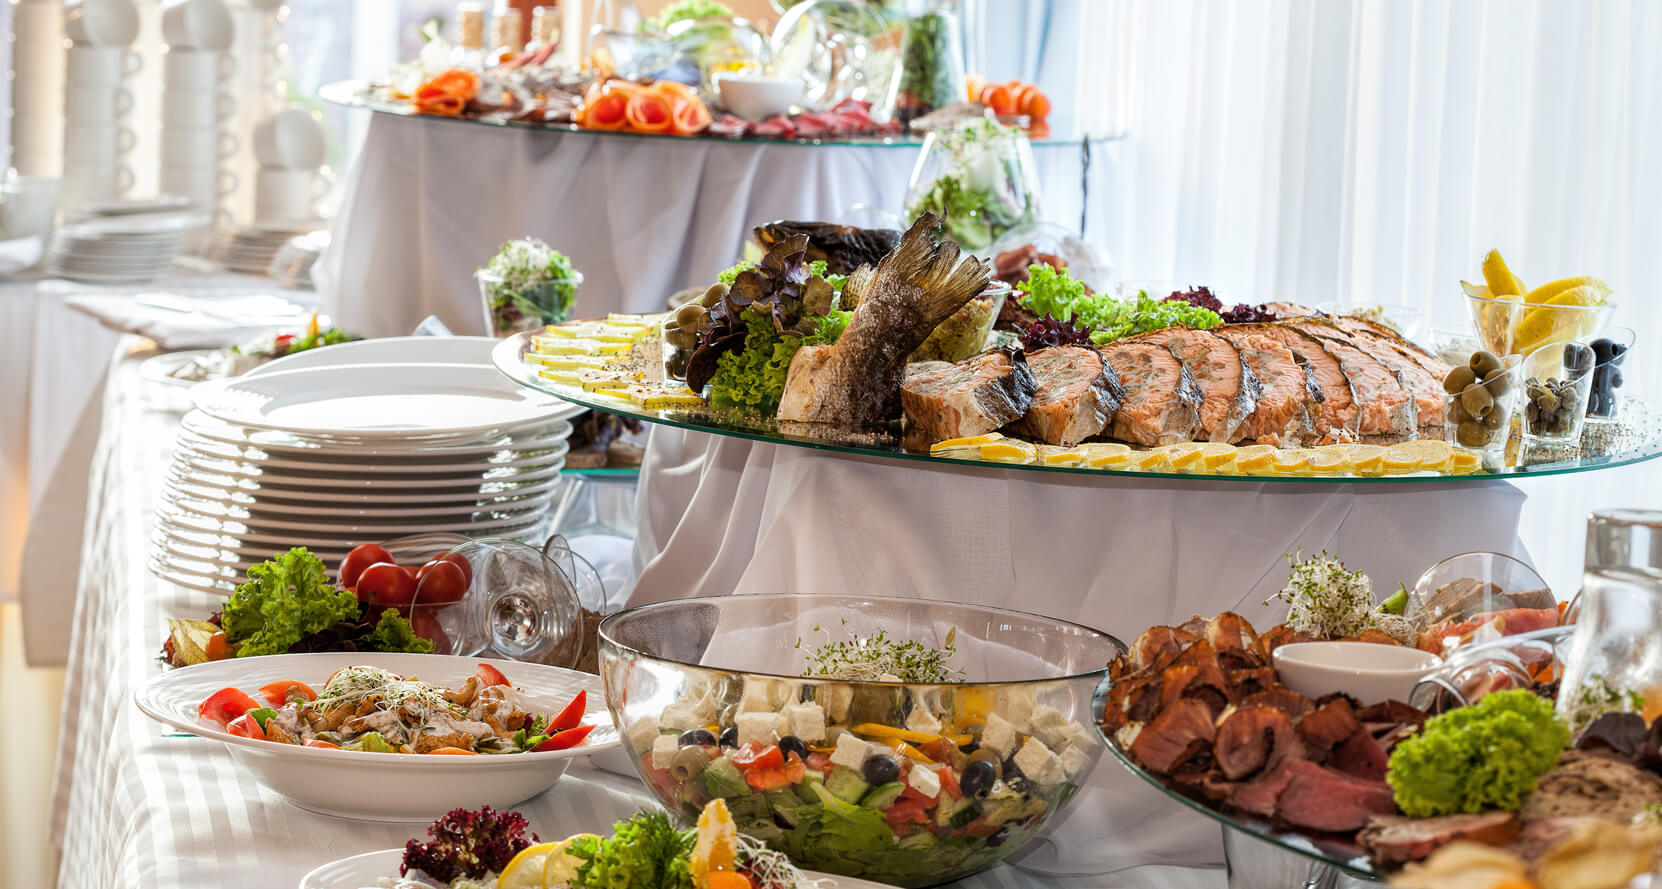 Buffet Dinner Packages A Cappella Catering Co. At your service